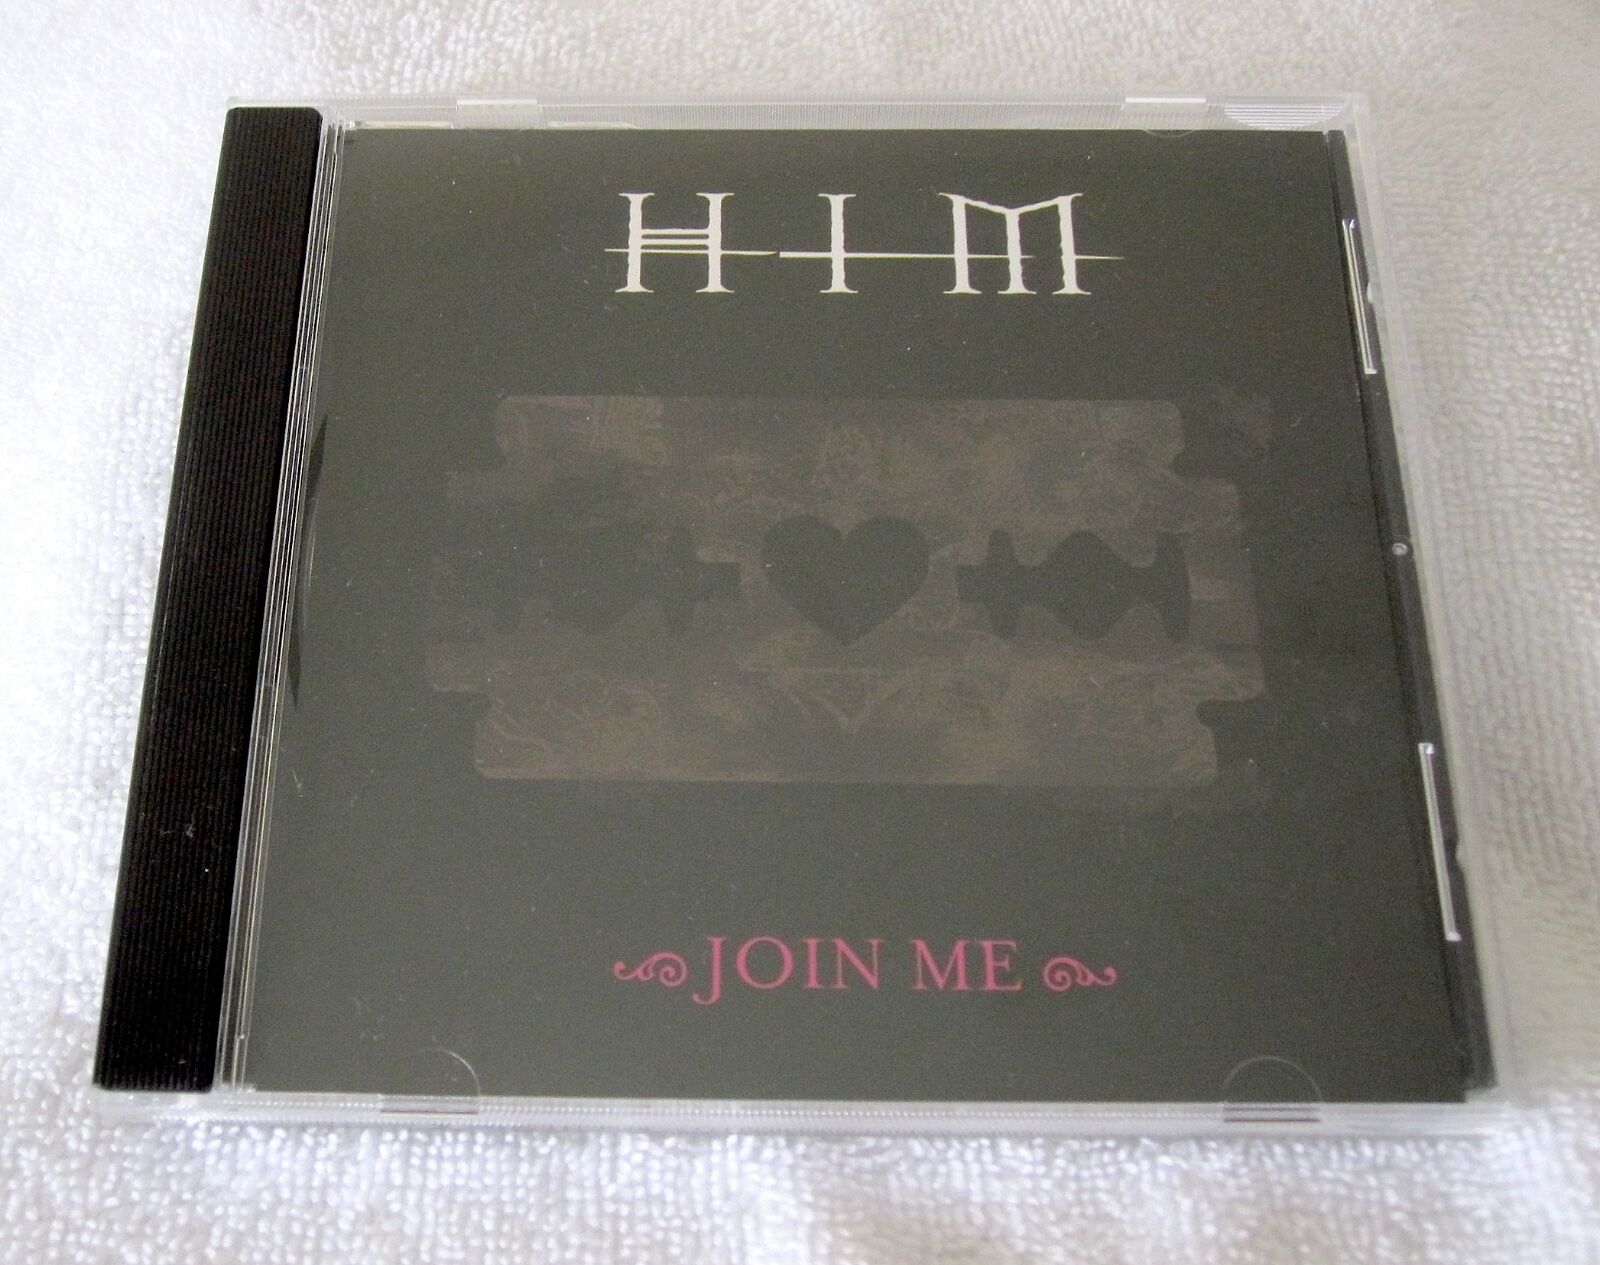 Him - Join Me Promotional Cd (ville Valo, Rare)